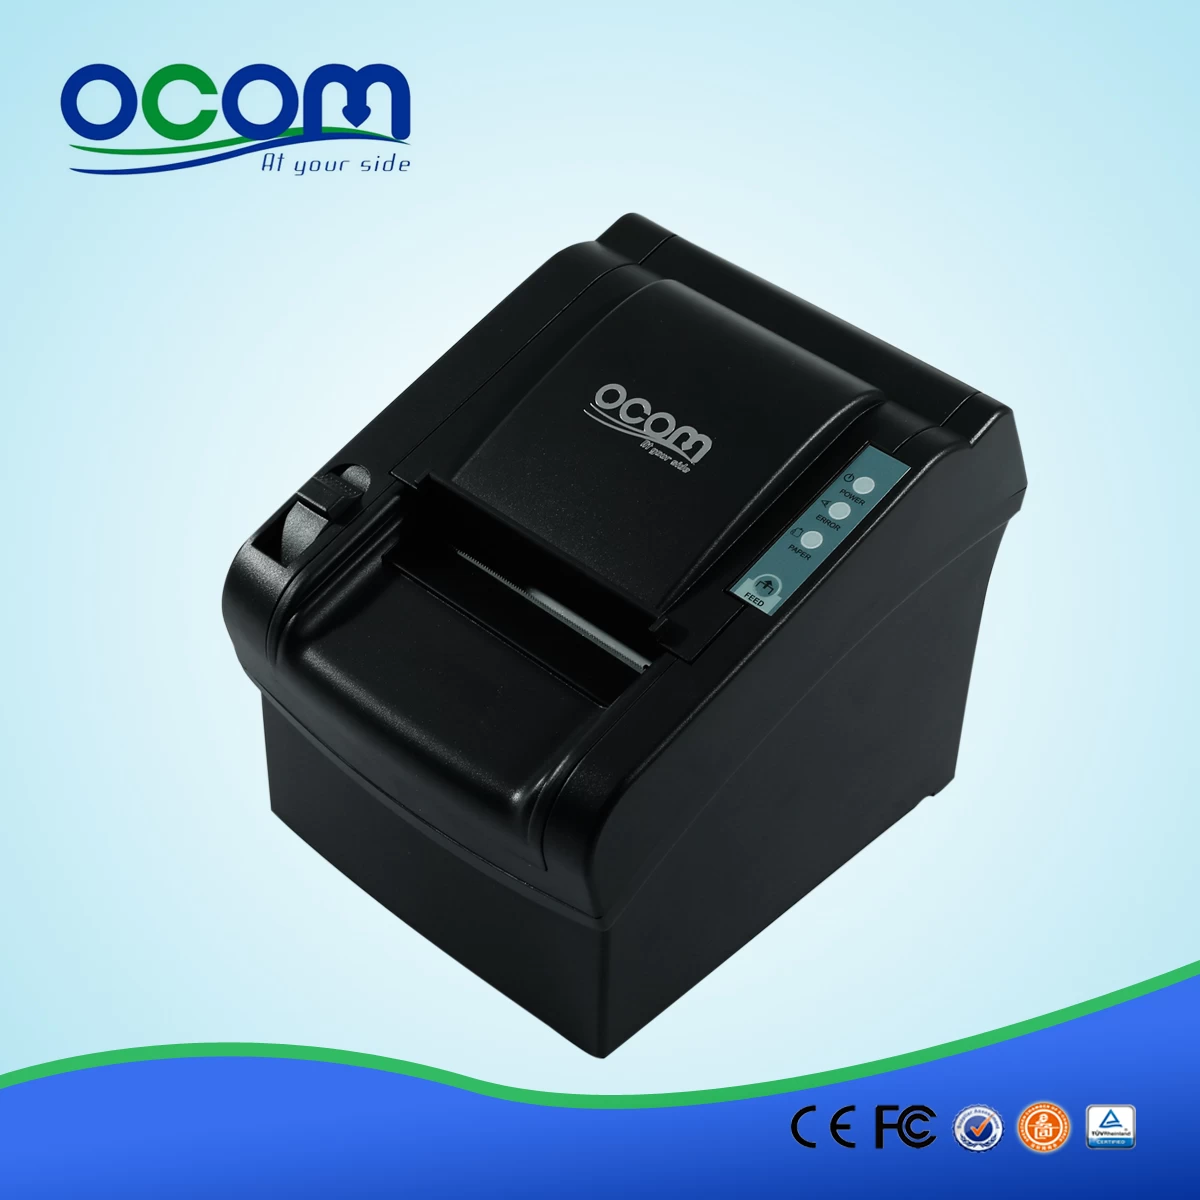 OCPP-802 80mm Impact Thermal Printers for POS System